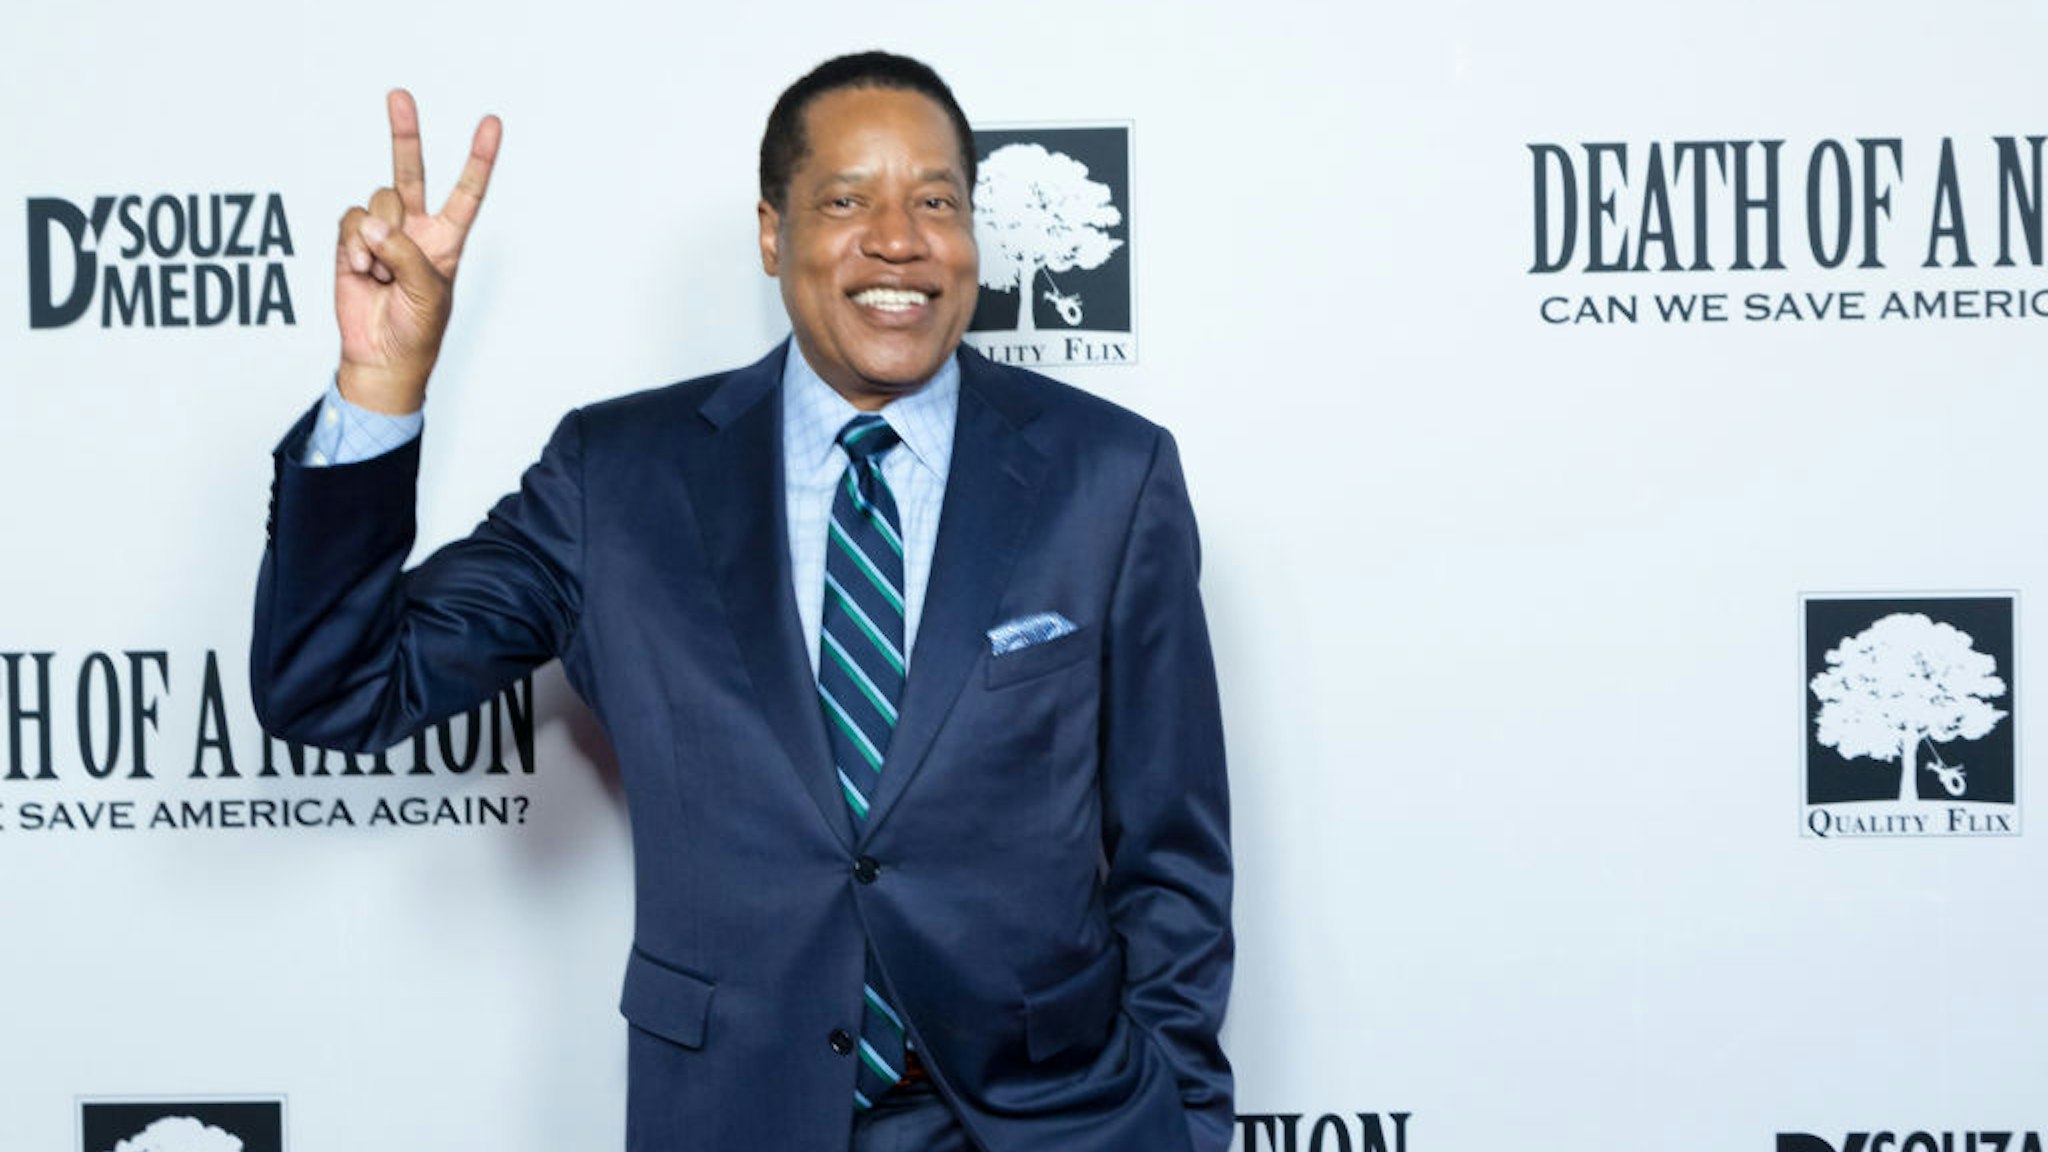 LOS ANGELES, CALIFORNIA - JULY 31: Radio Talk Show Host Larry Elder attends the "Death Of A Nation" Premiere at Regal Cinemas L.A. Live on July 31, 2018 in Los Angeles, California. (Photo by Greg Doherty/Getty Images)